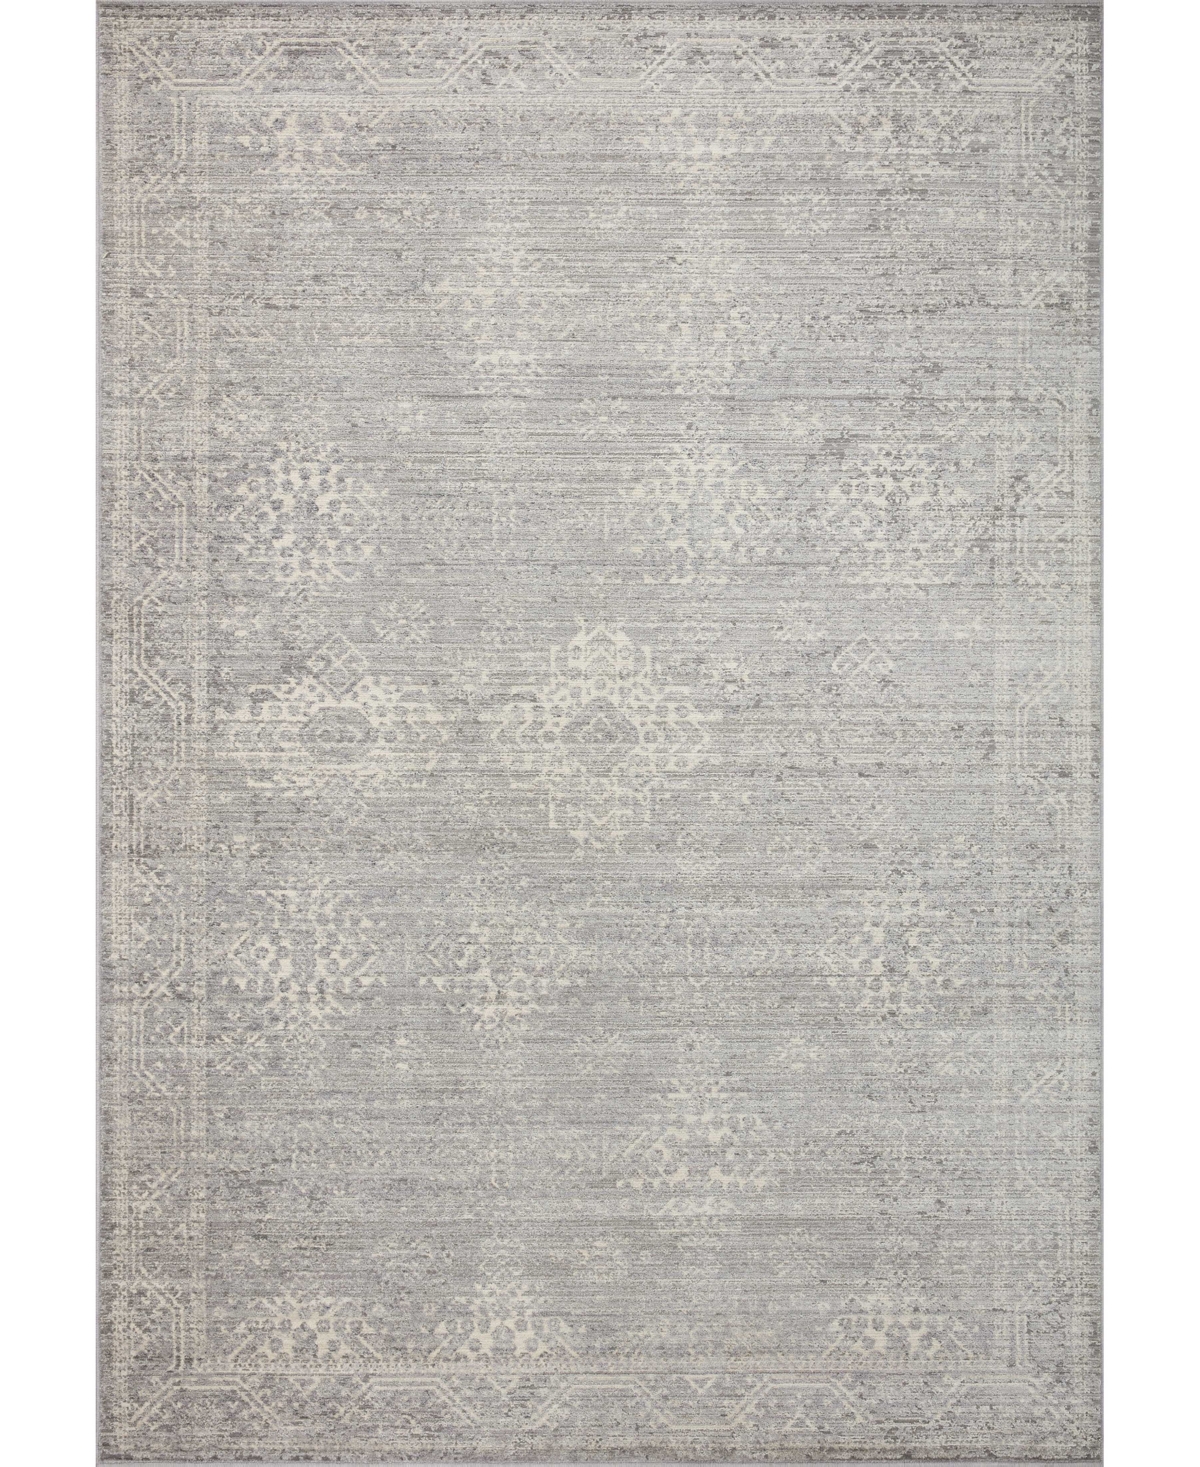 Loloi Indra Ina-02 5' x 7'10in Area Rug - Silver